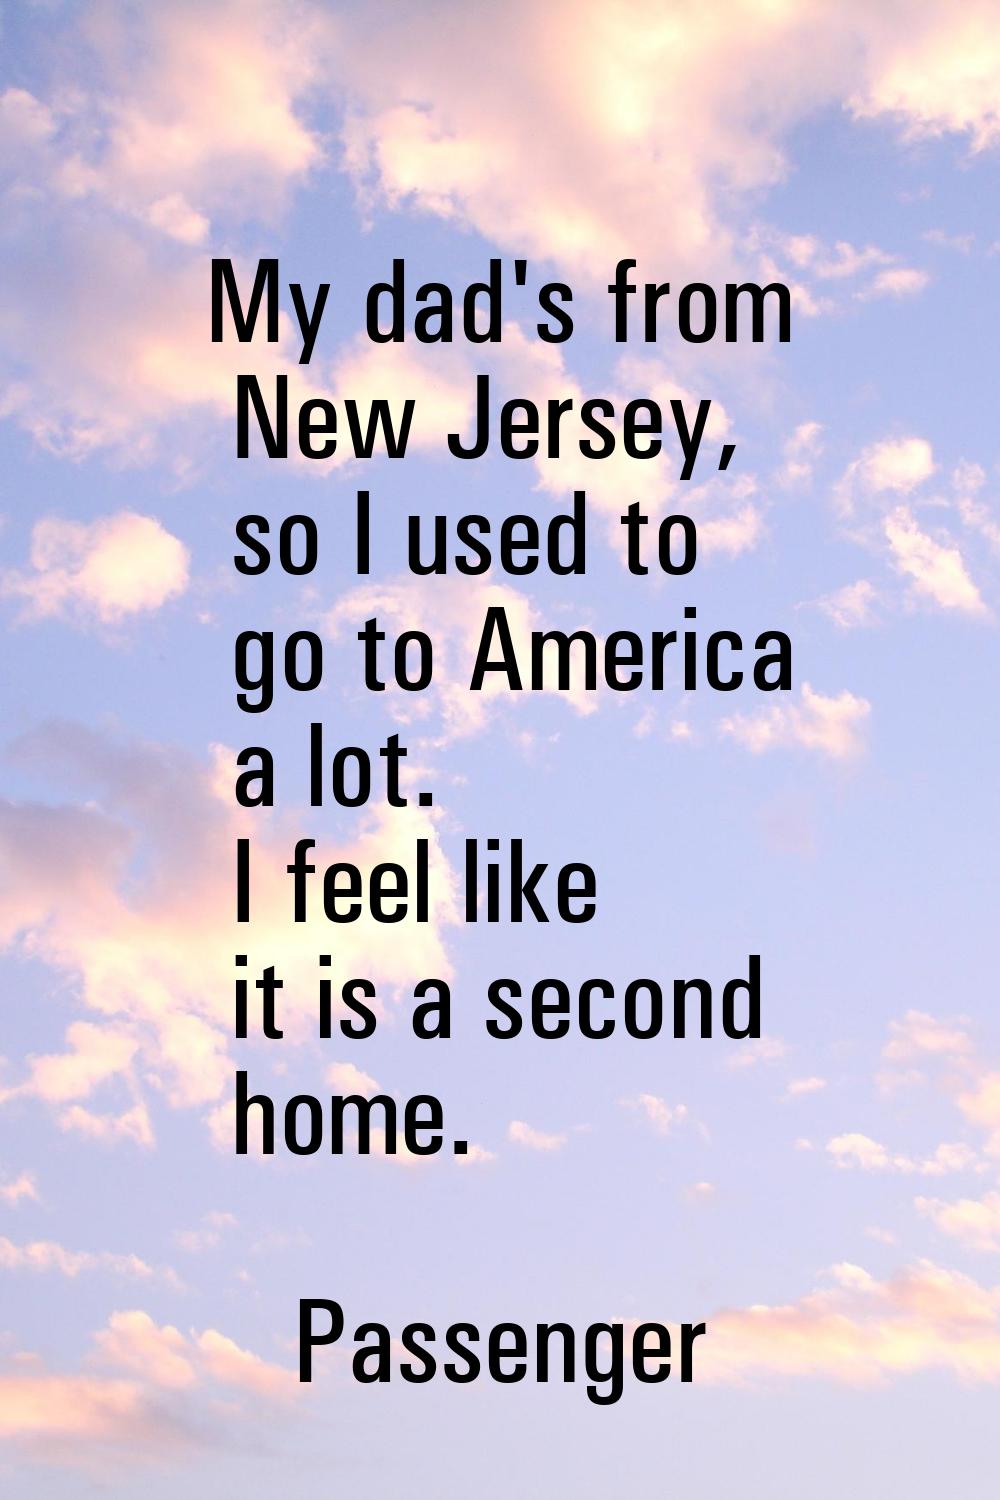 My dad's from New Jersey, so I used to go to America a lot. I feel like it is a second home.